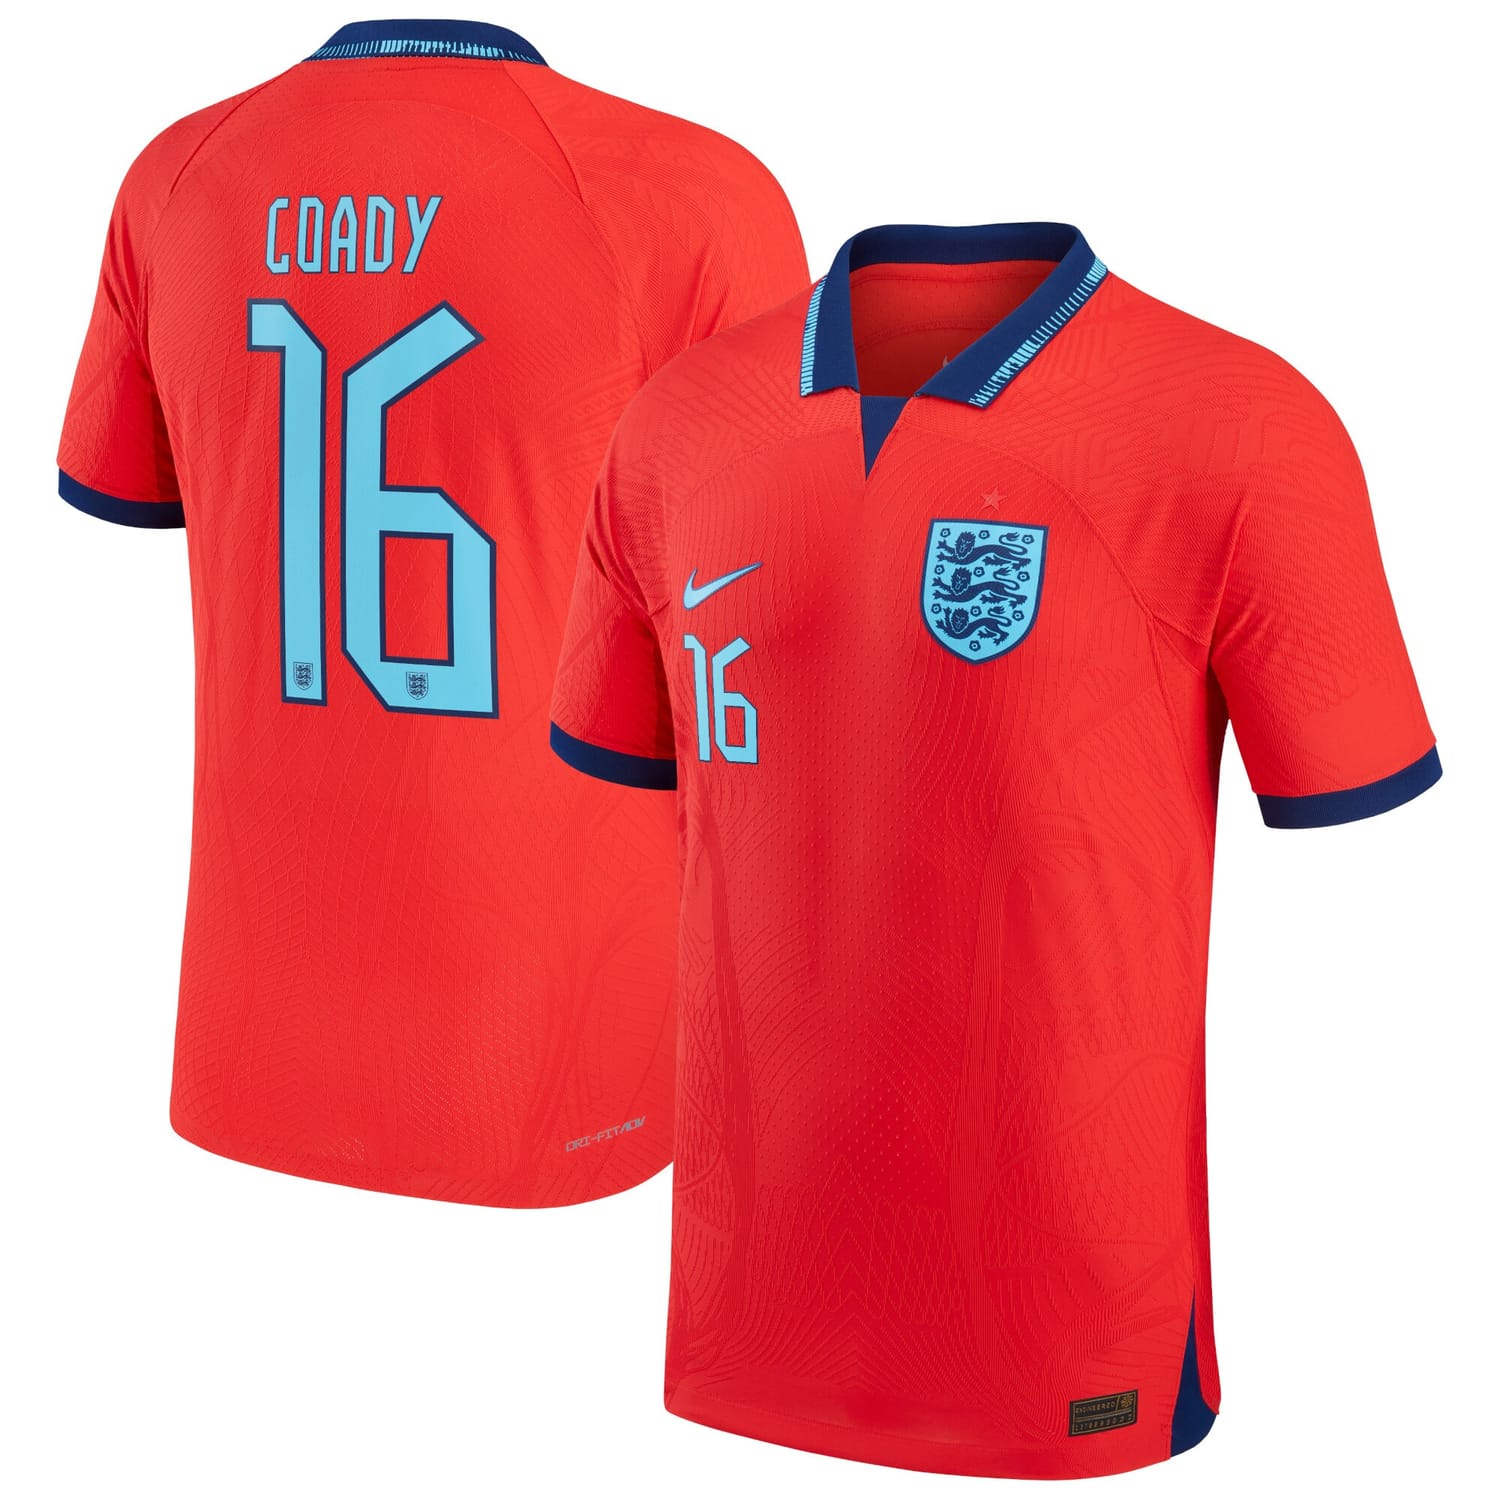 England National Team Away Authentic Jersey Shirt 2022 player Conor Coady 16 printing for Men